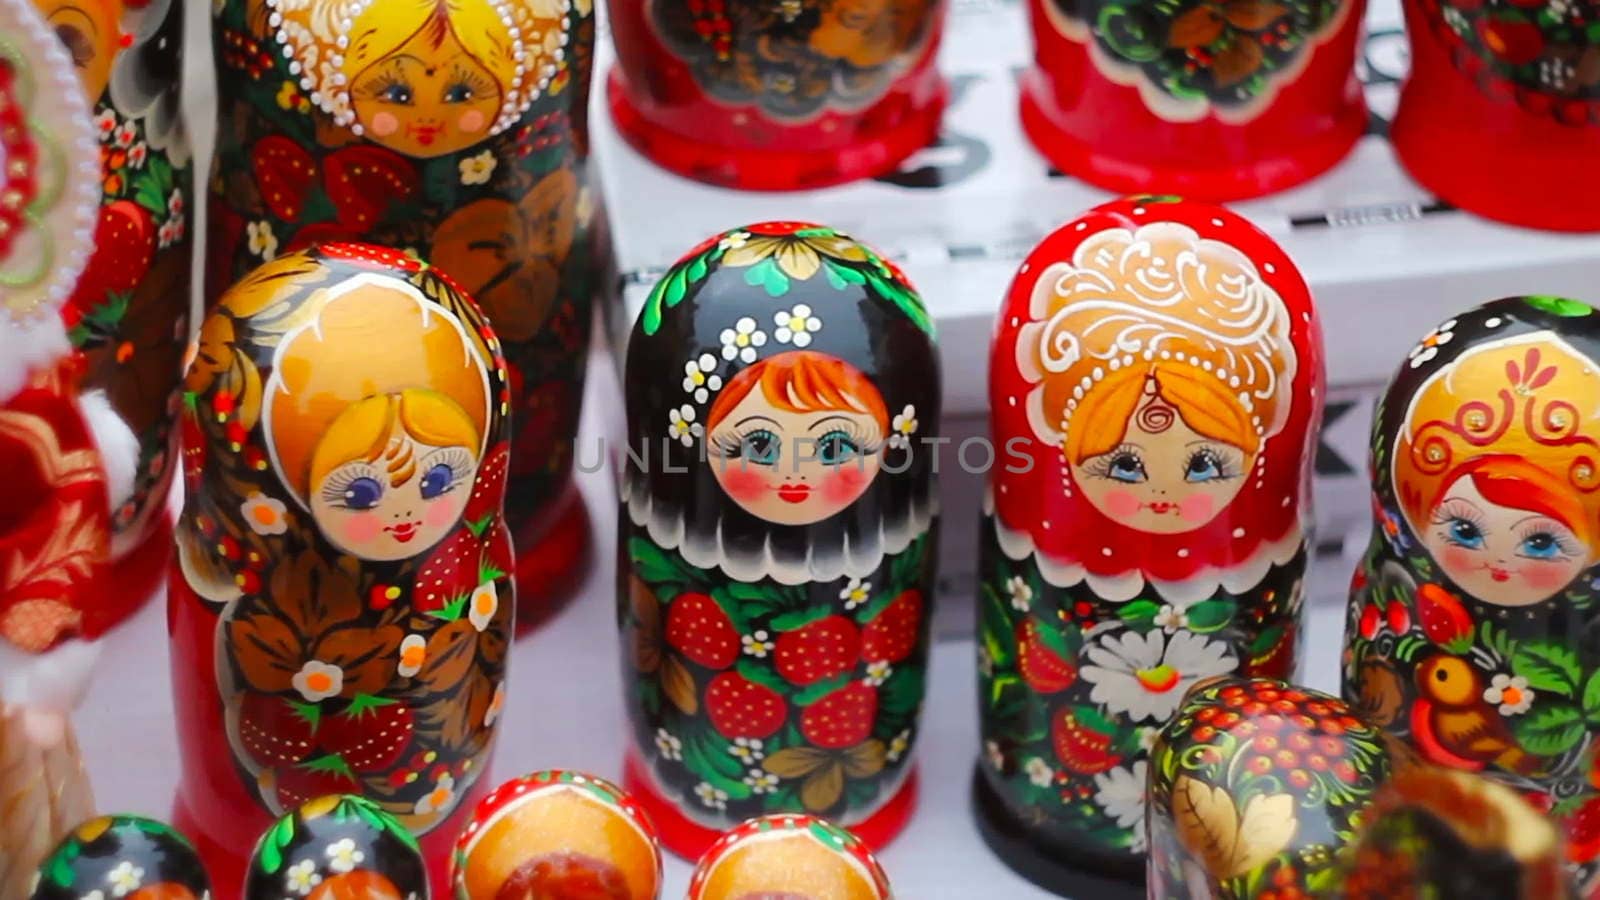 Russian wooden matryoshkas are on the table. by nolimit046